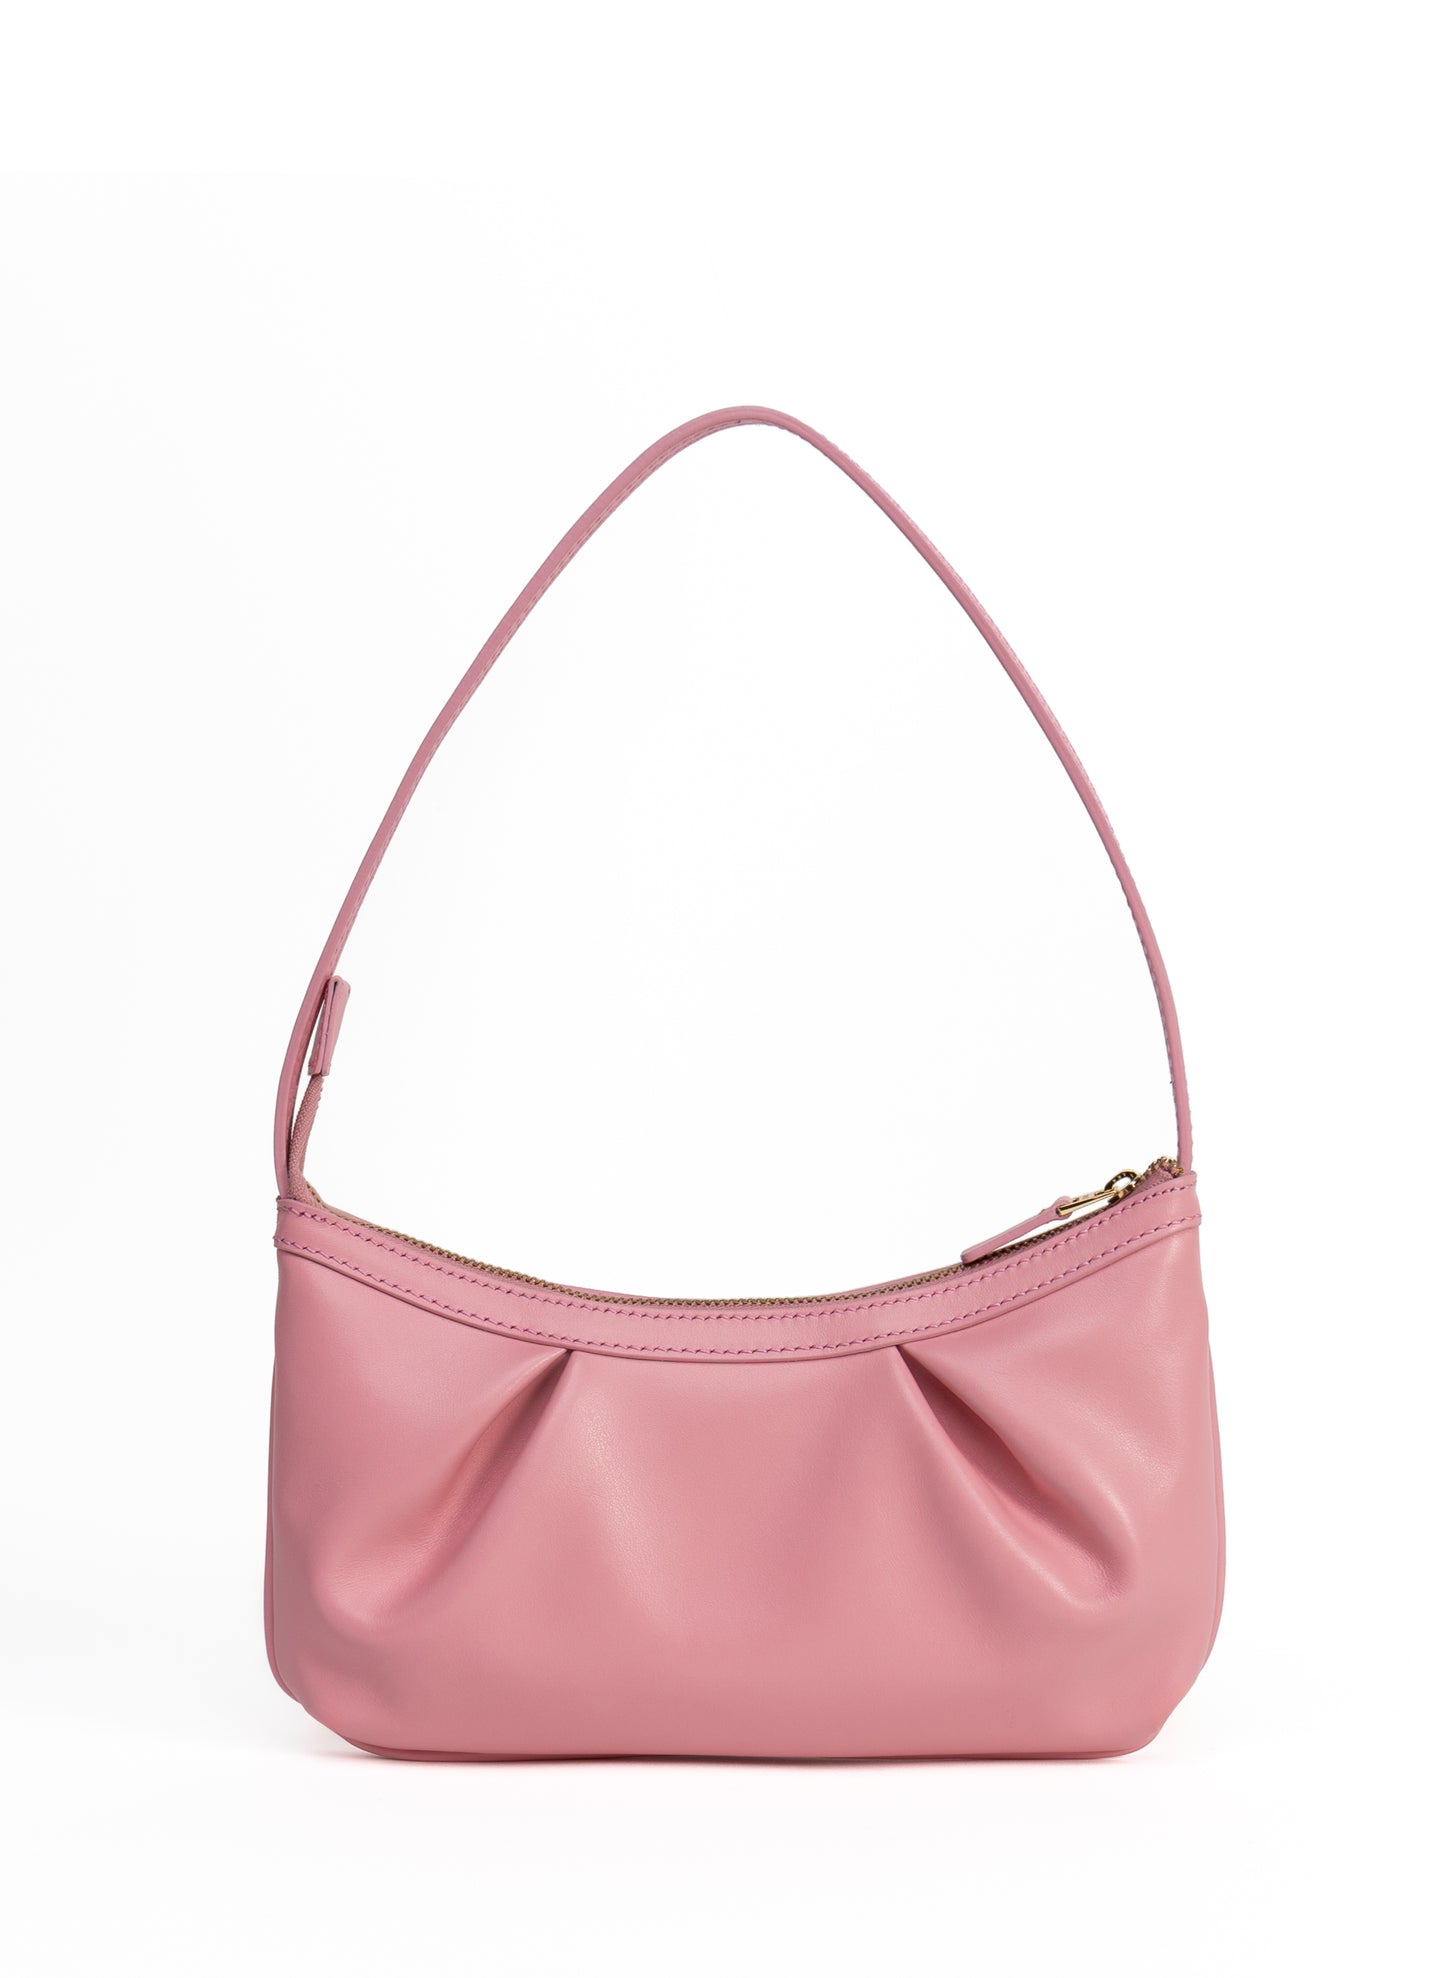 Dimple Pochette Leather Pink